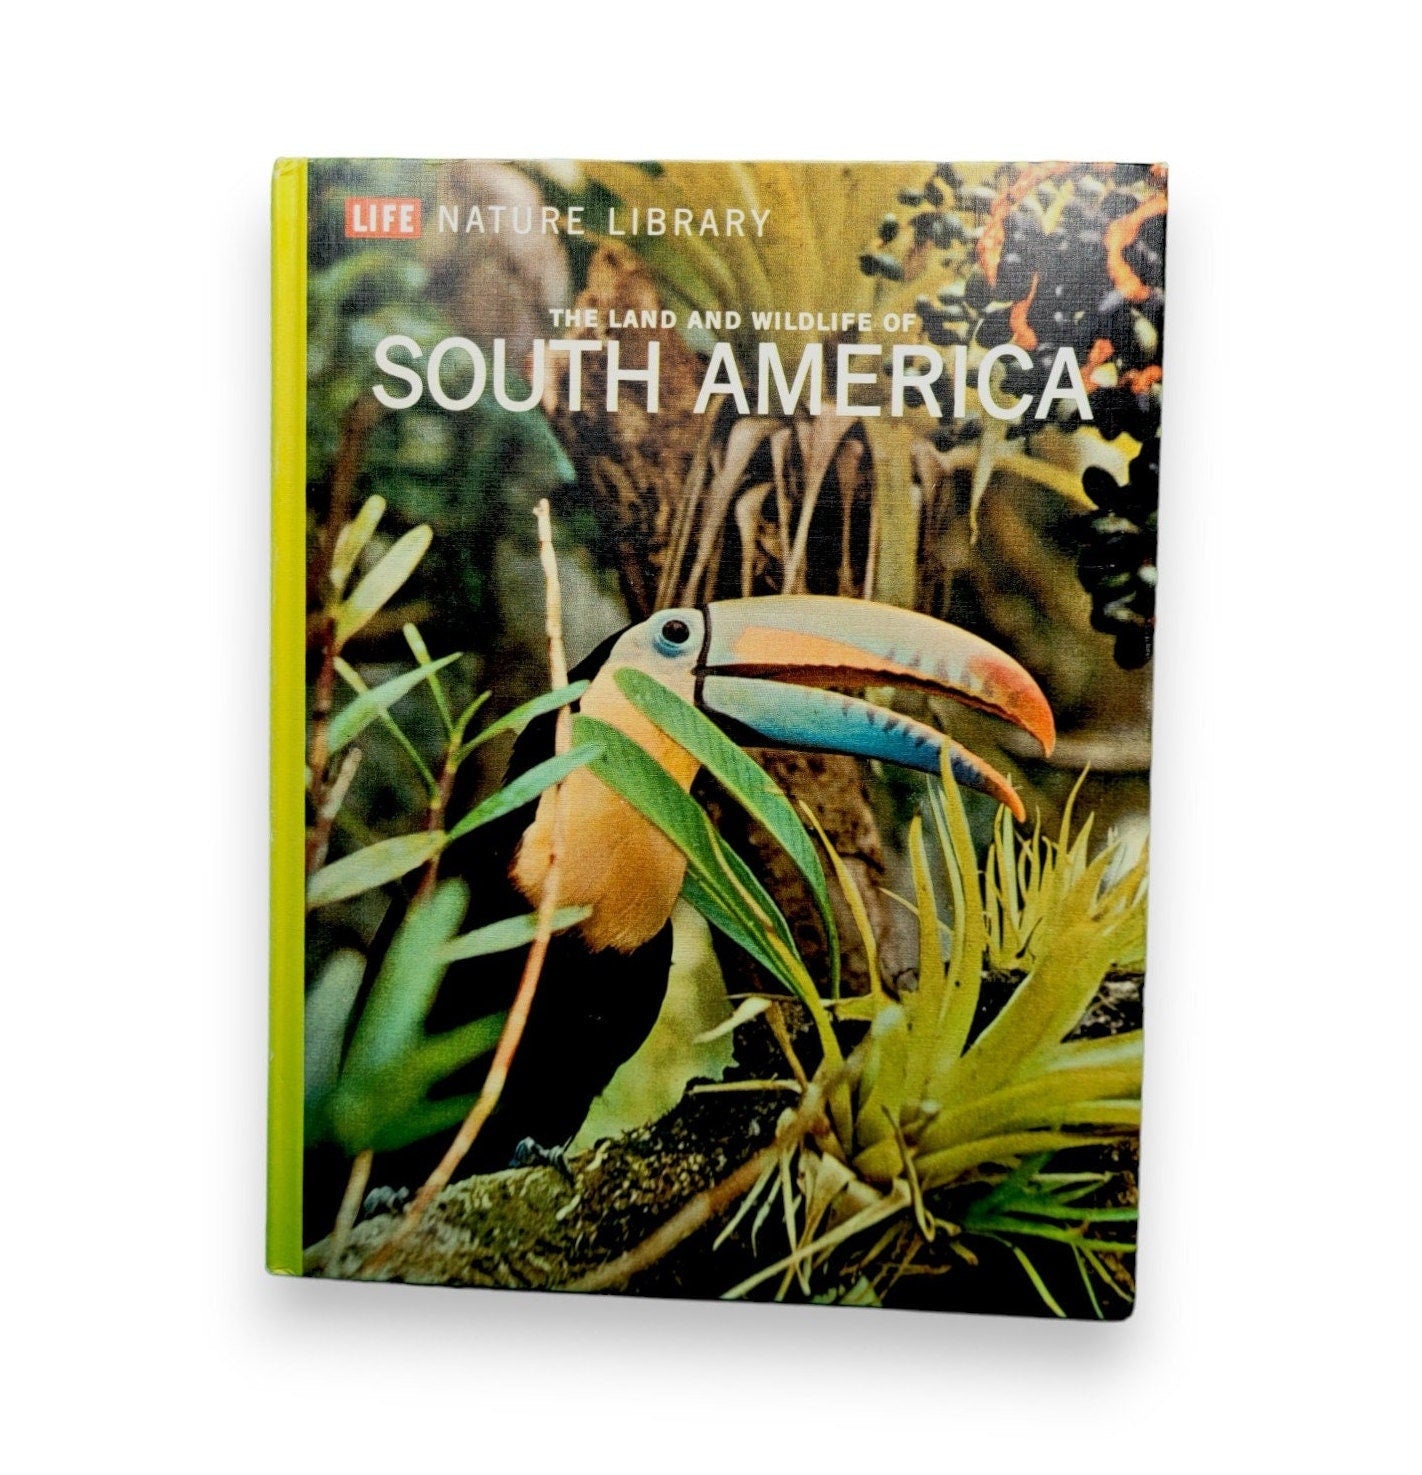 The Land and Wildlife of South America by Marston Bates (LIFE Nature Library) 1964